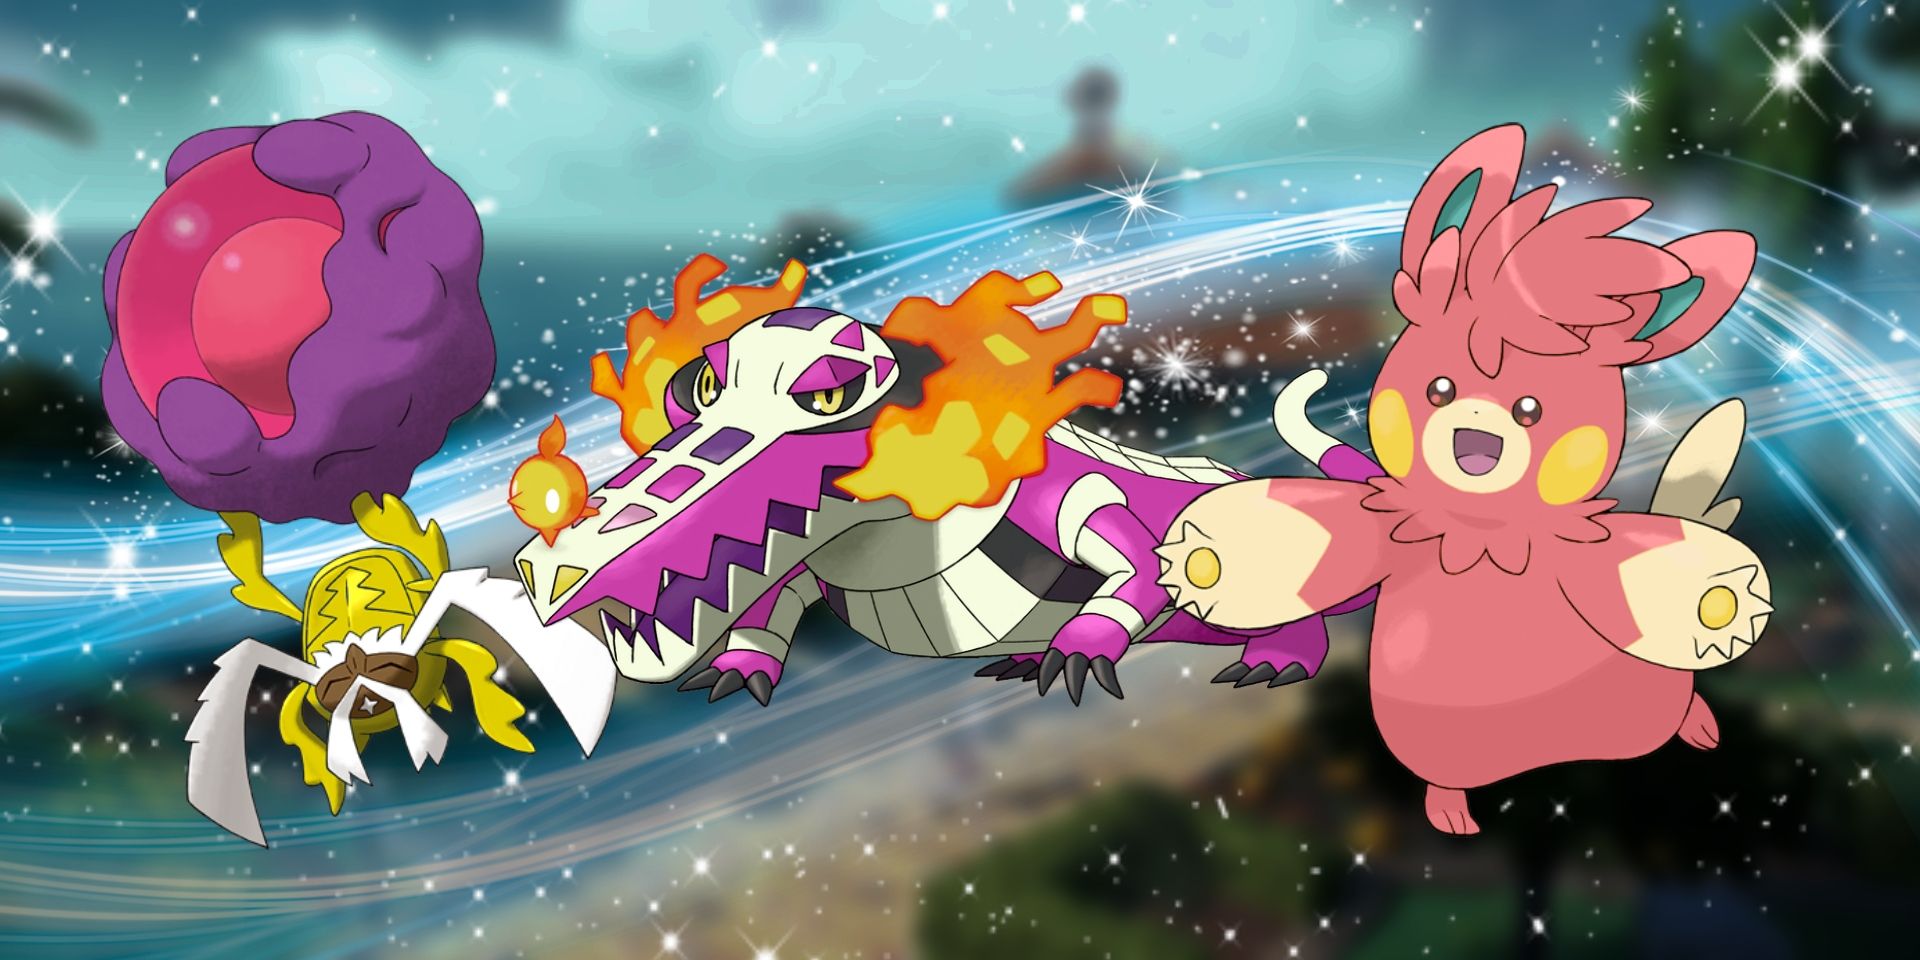 10 Weakest Shiny Pokémon That Appeared In The Anime